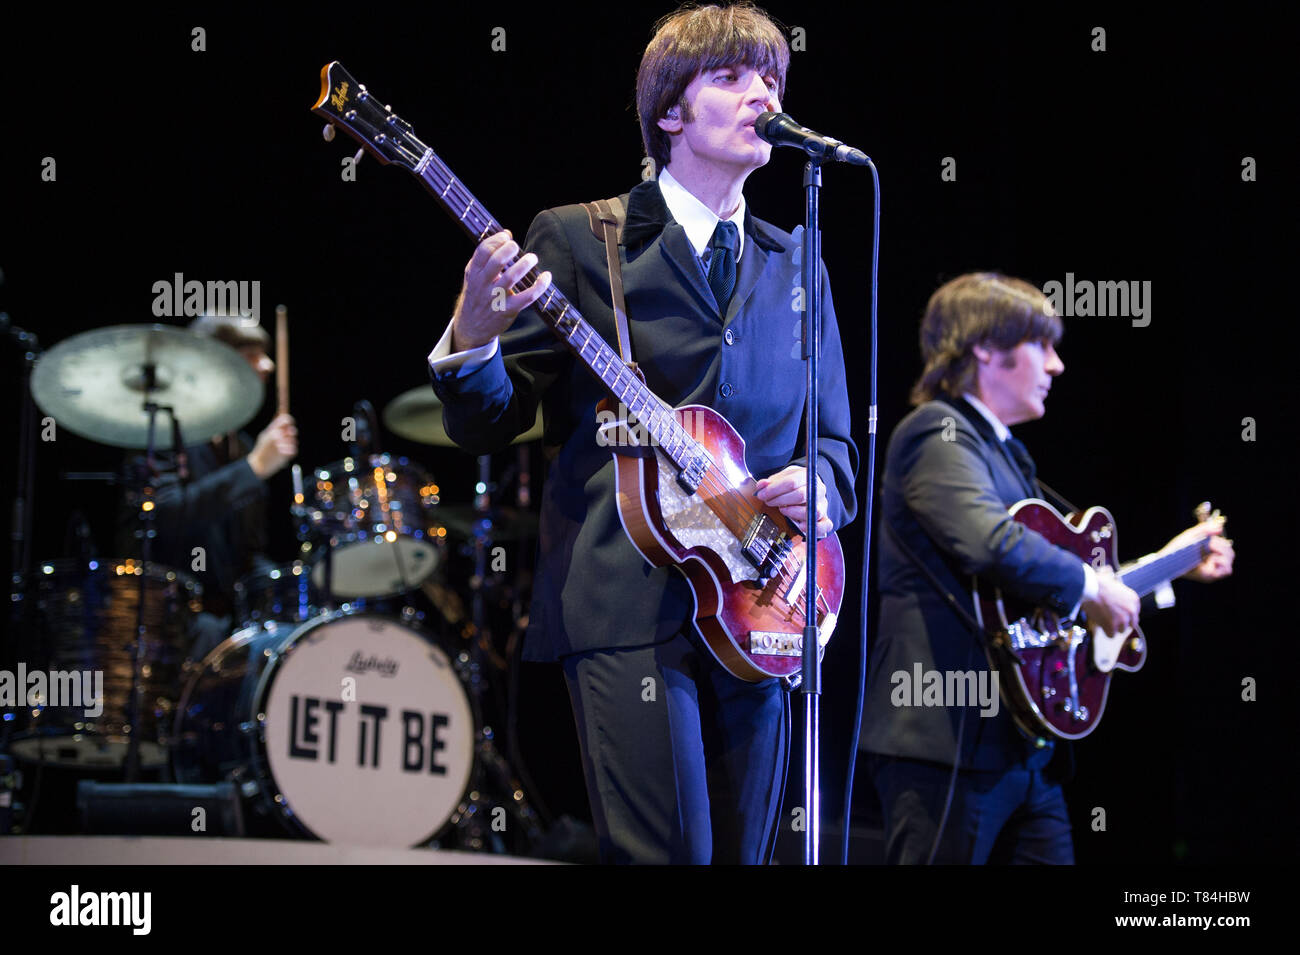 Glasgow, UK. 10 May 2019. LET IT BE, The Musical. The Iconic music of The Beatles with LET IT BE, the spectacular new concert jam-packed with over 40 of The Beatles’ greatest hits! Direct from the West End, this international hit show celebrates the legacy of the world’s greatest rock ‘n’ roll band. Reliving The Beatles’ meteoric rise from their humble beginnings to the heights of Beatlemania with live performances of early tracks including Twist and Shout and She Loves You as well as global mega-hits Yesterday, Hey Jude, Come Together and Let It Be. Credit: Colin Fisher/Alamy Live News Stock Photo